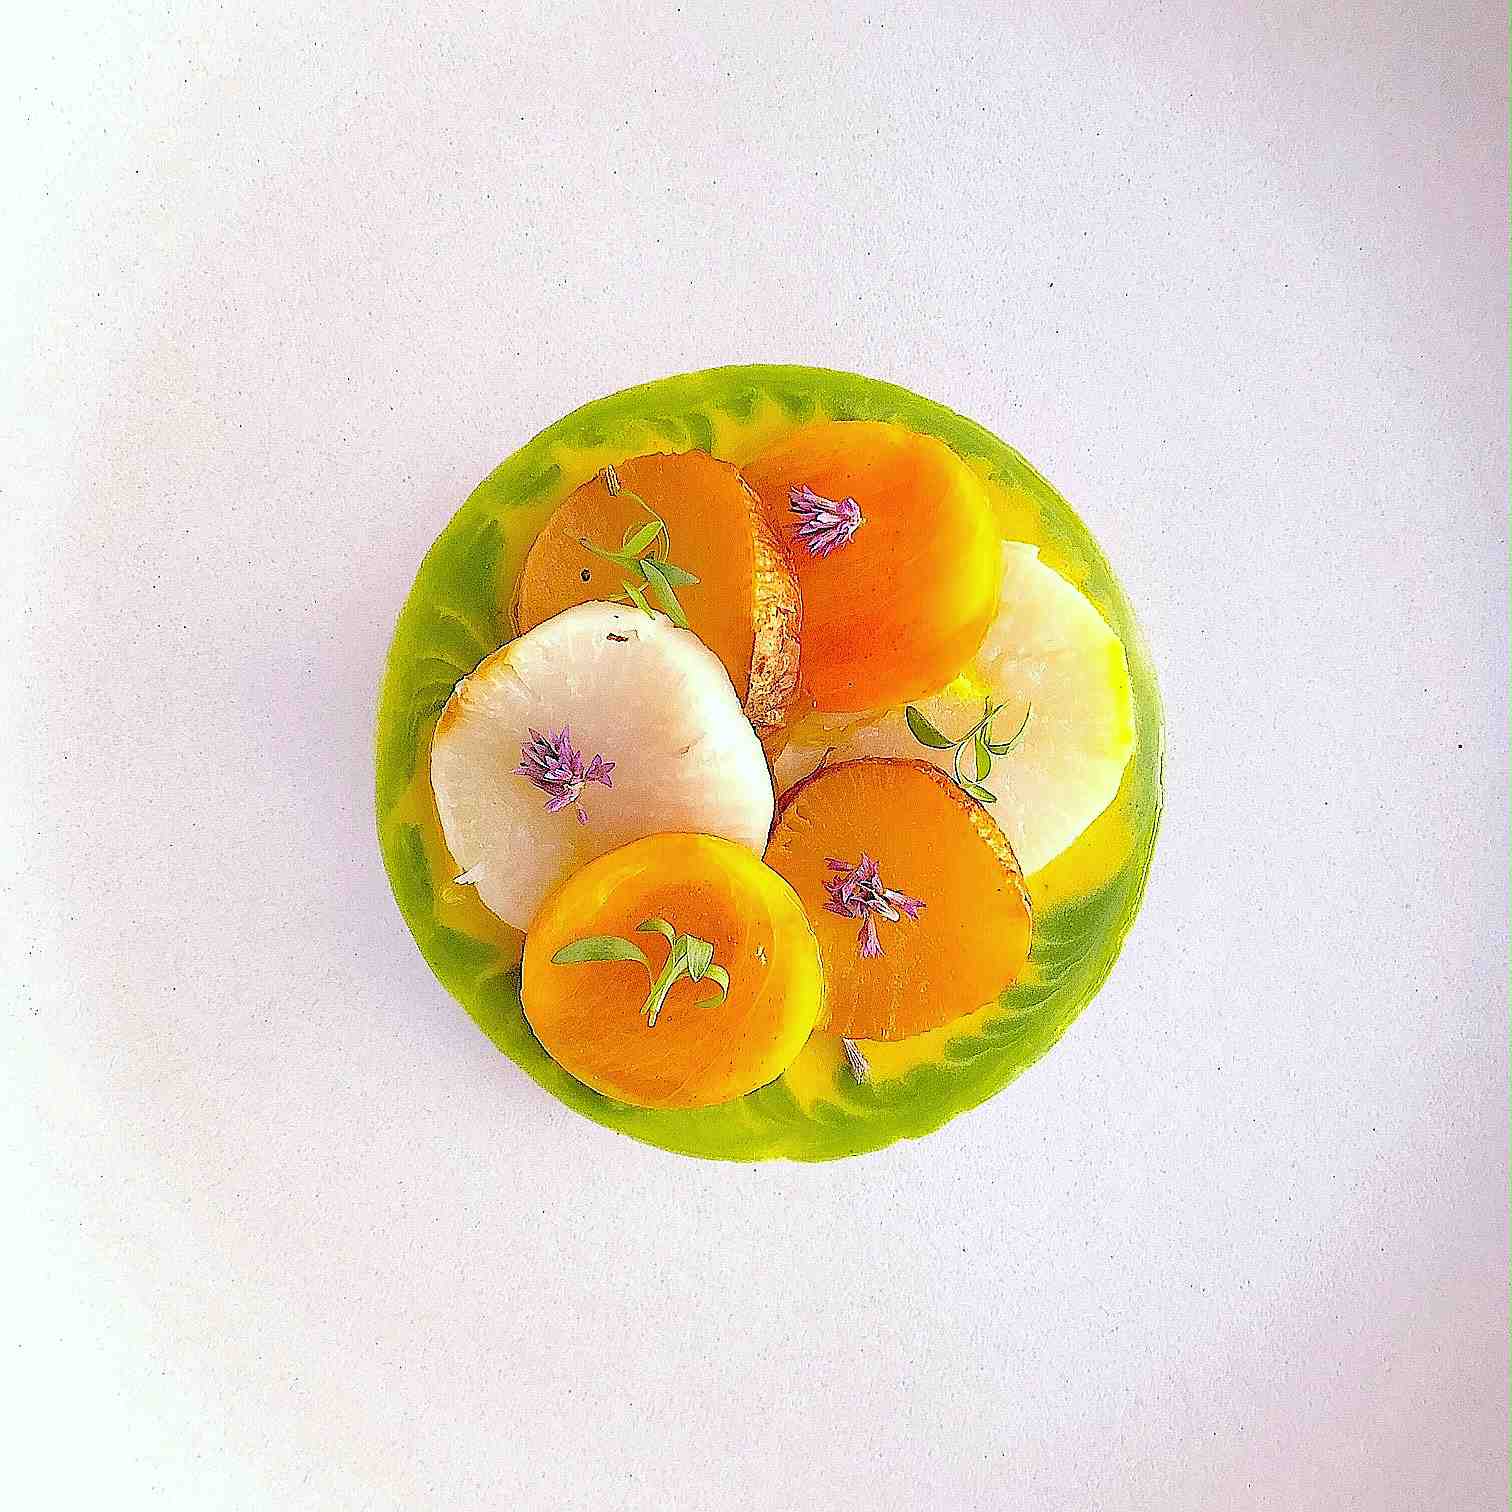 turnips recipe with, persimmon, anise hyssop (